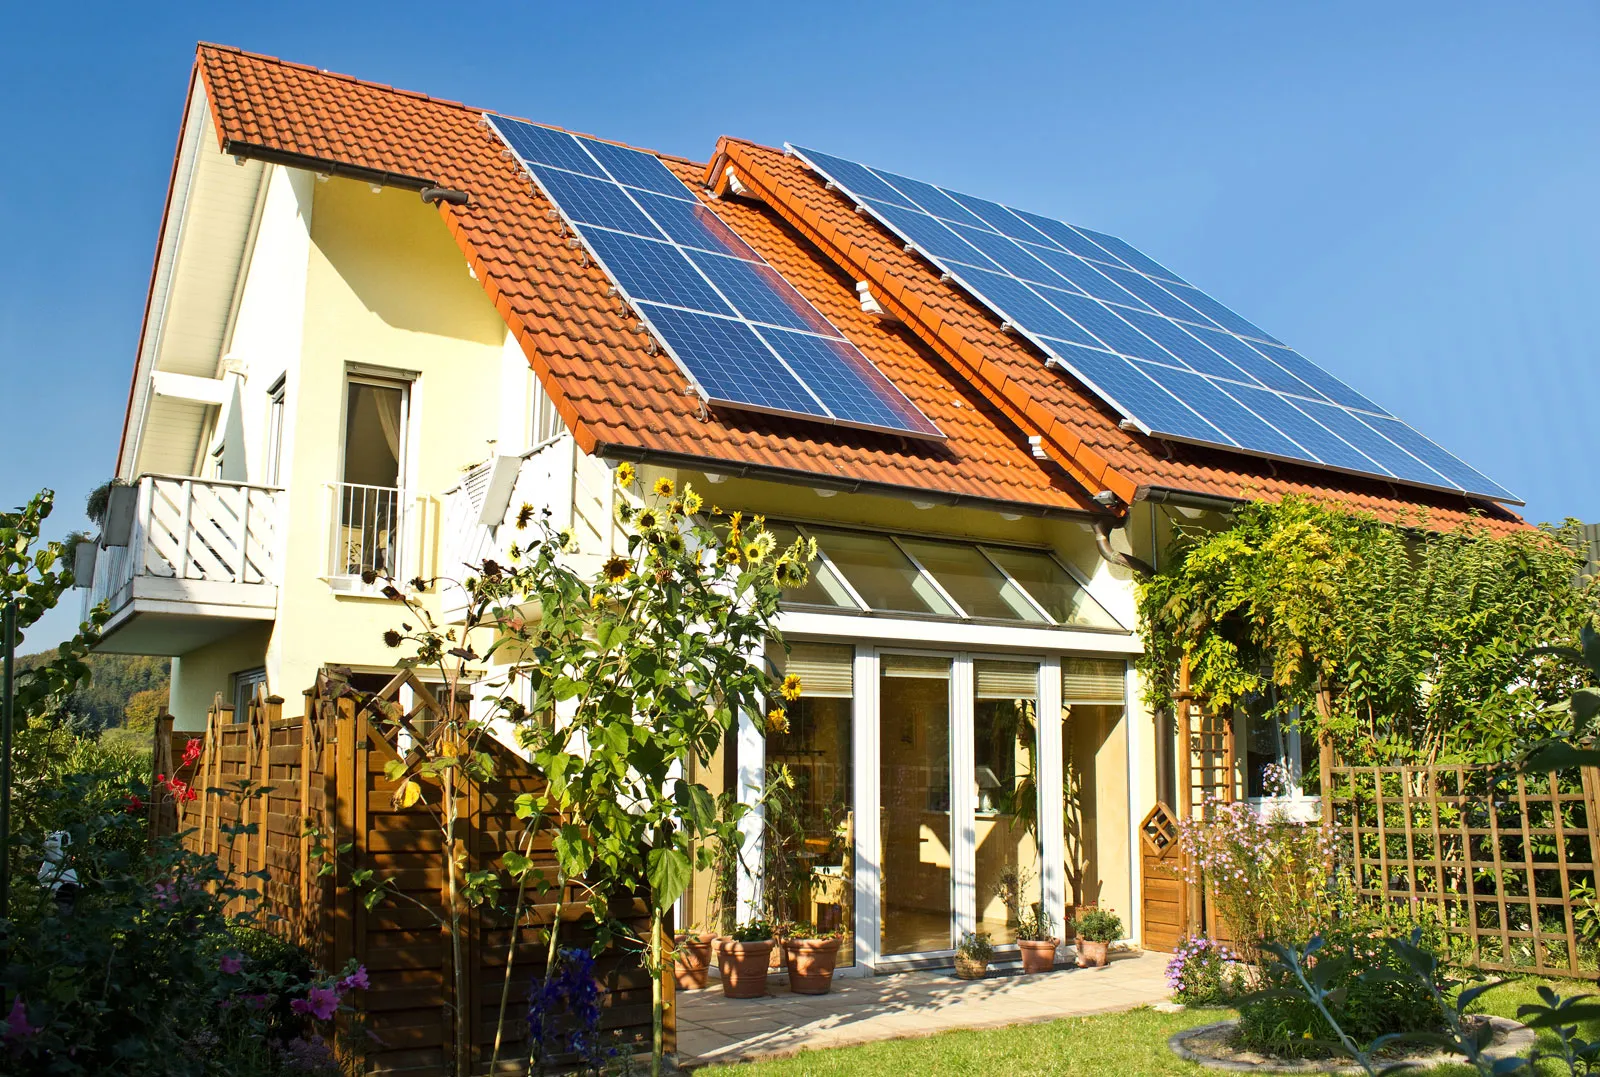 How Solar Panels Can Help You With Your Home & Business